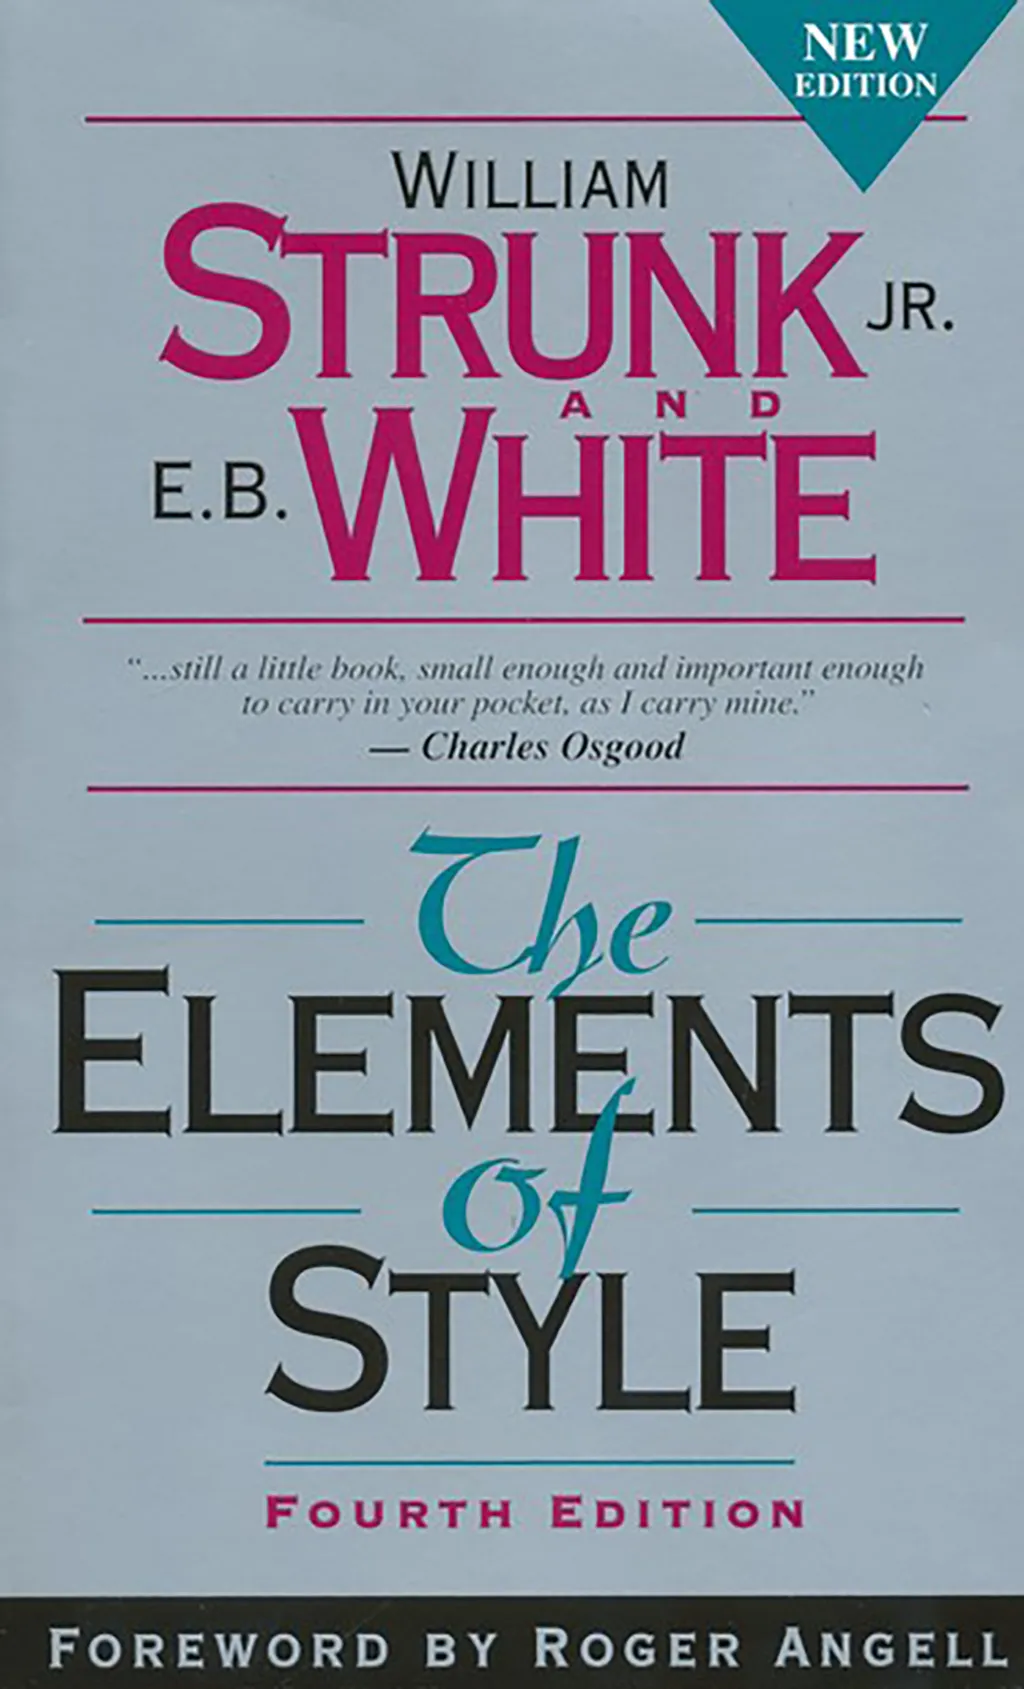 the elements of style, books every man should read